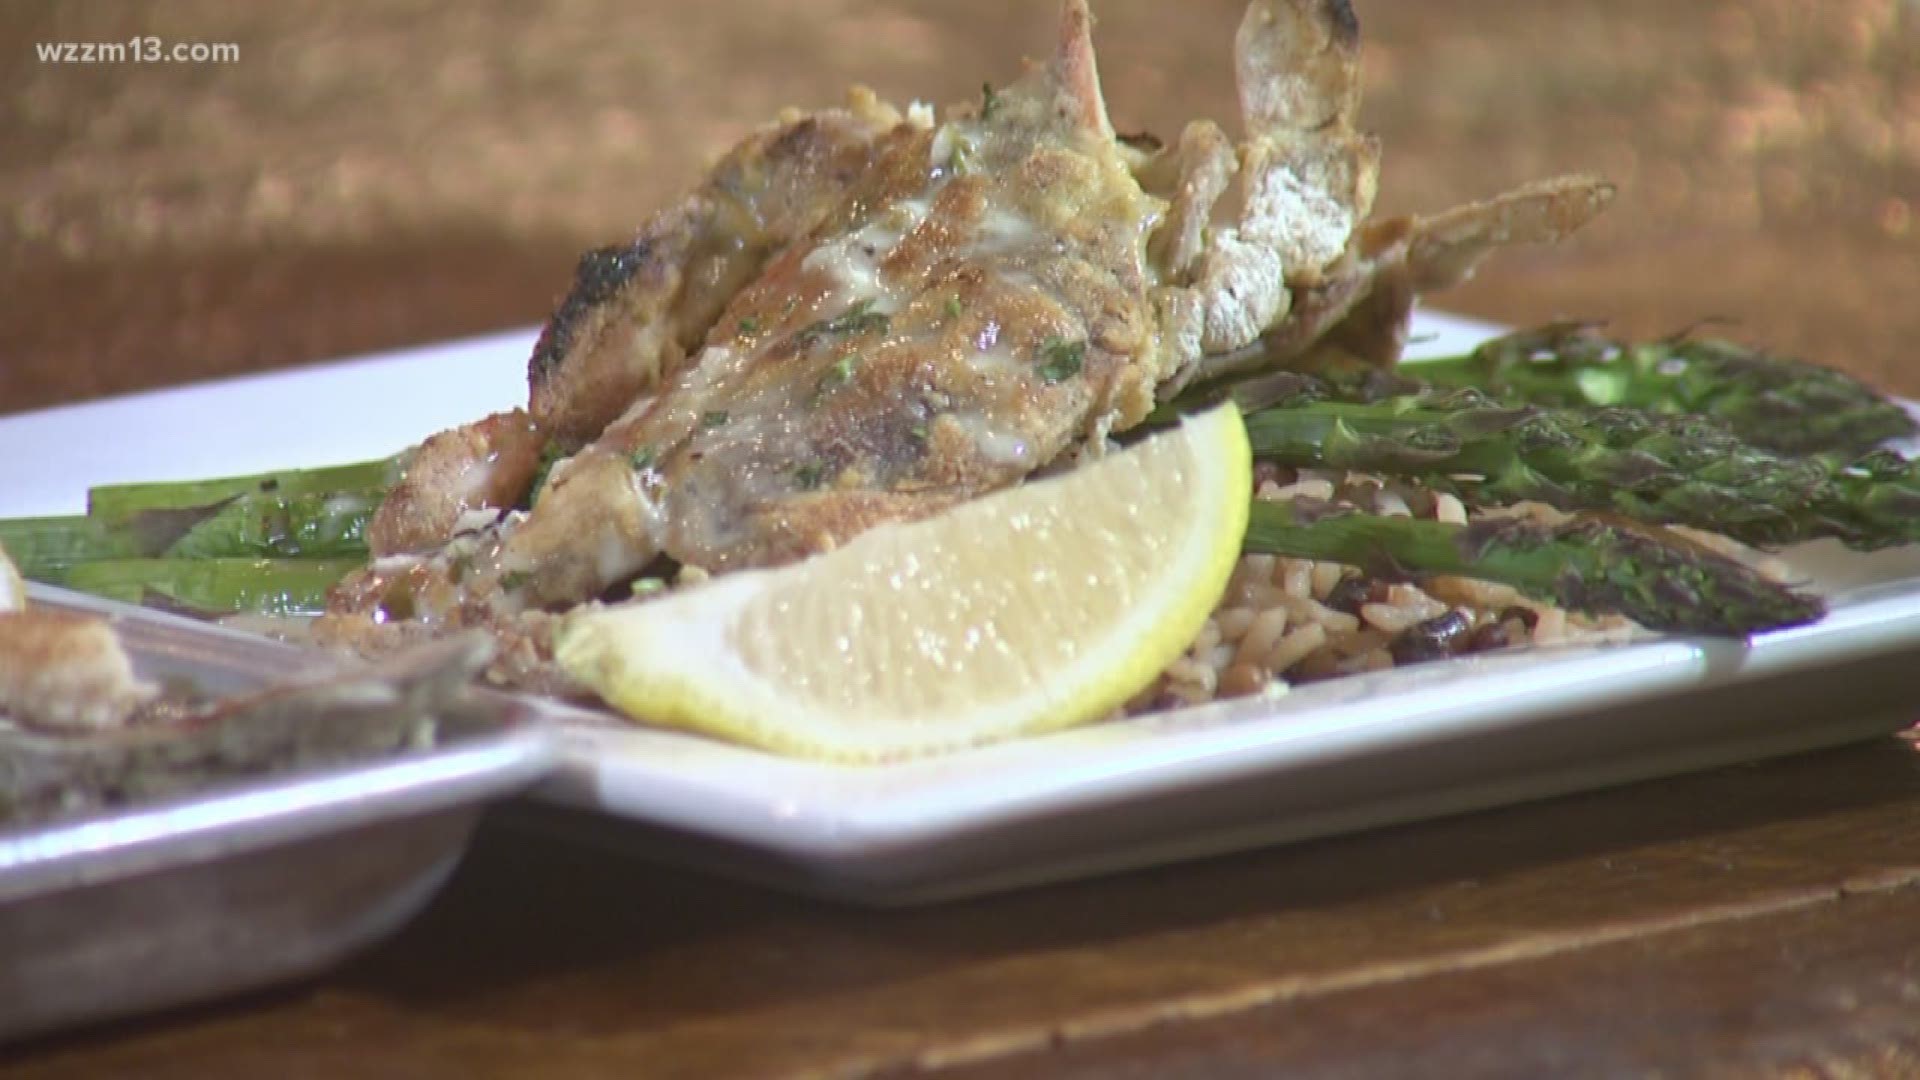 In this edition of Let's Eat, James and Dave get some southern seafood at Carolina Lowcountry Kitchen.